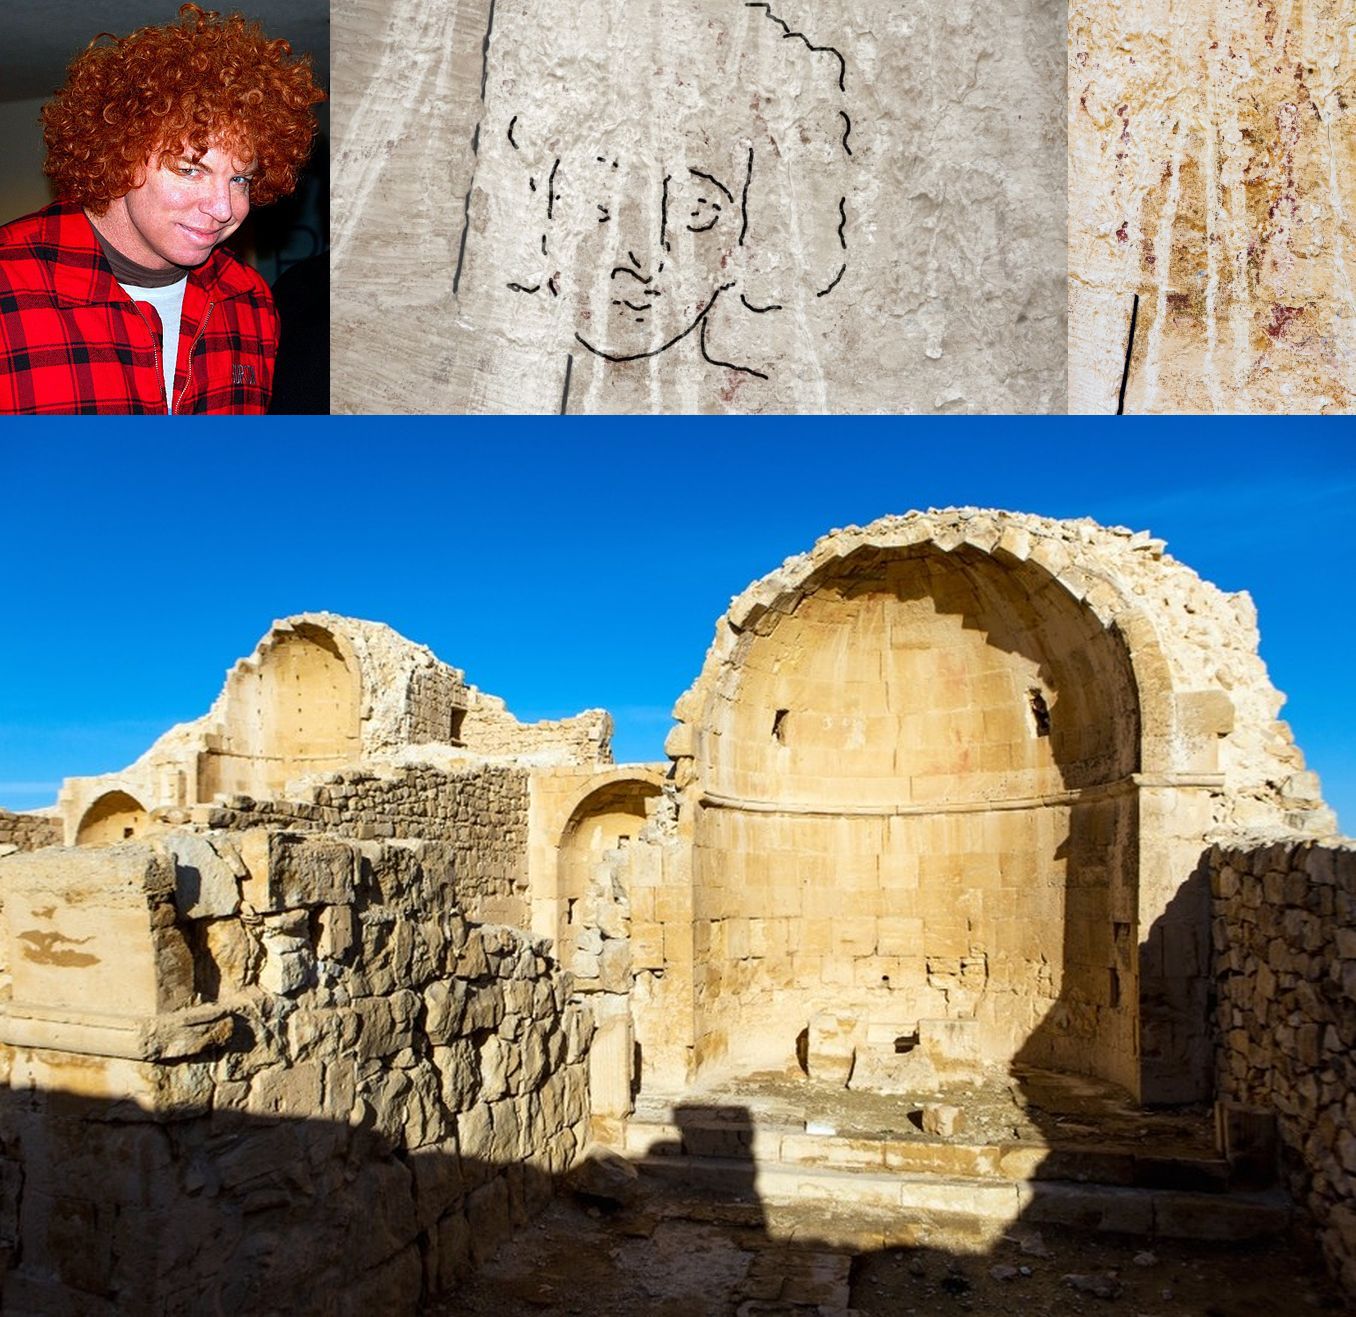 Art historian Dr Emma Maayan-Fanar from the University of Haifa "It was the face of Jesus at his baptism, looking at us." as discovered on the Shivta church ruins. The Luxor is booking one show to see Carrot Top drown as he attempts to walk on water.